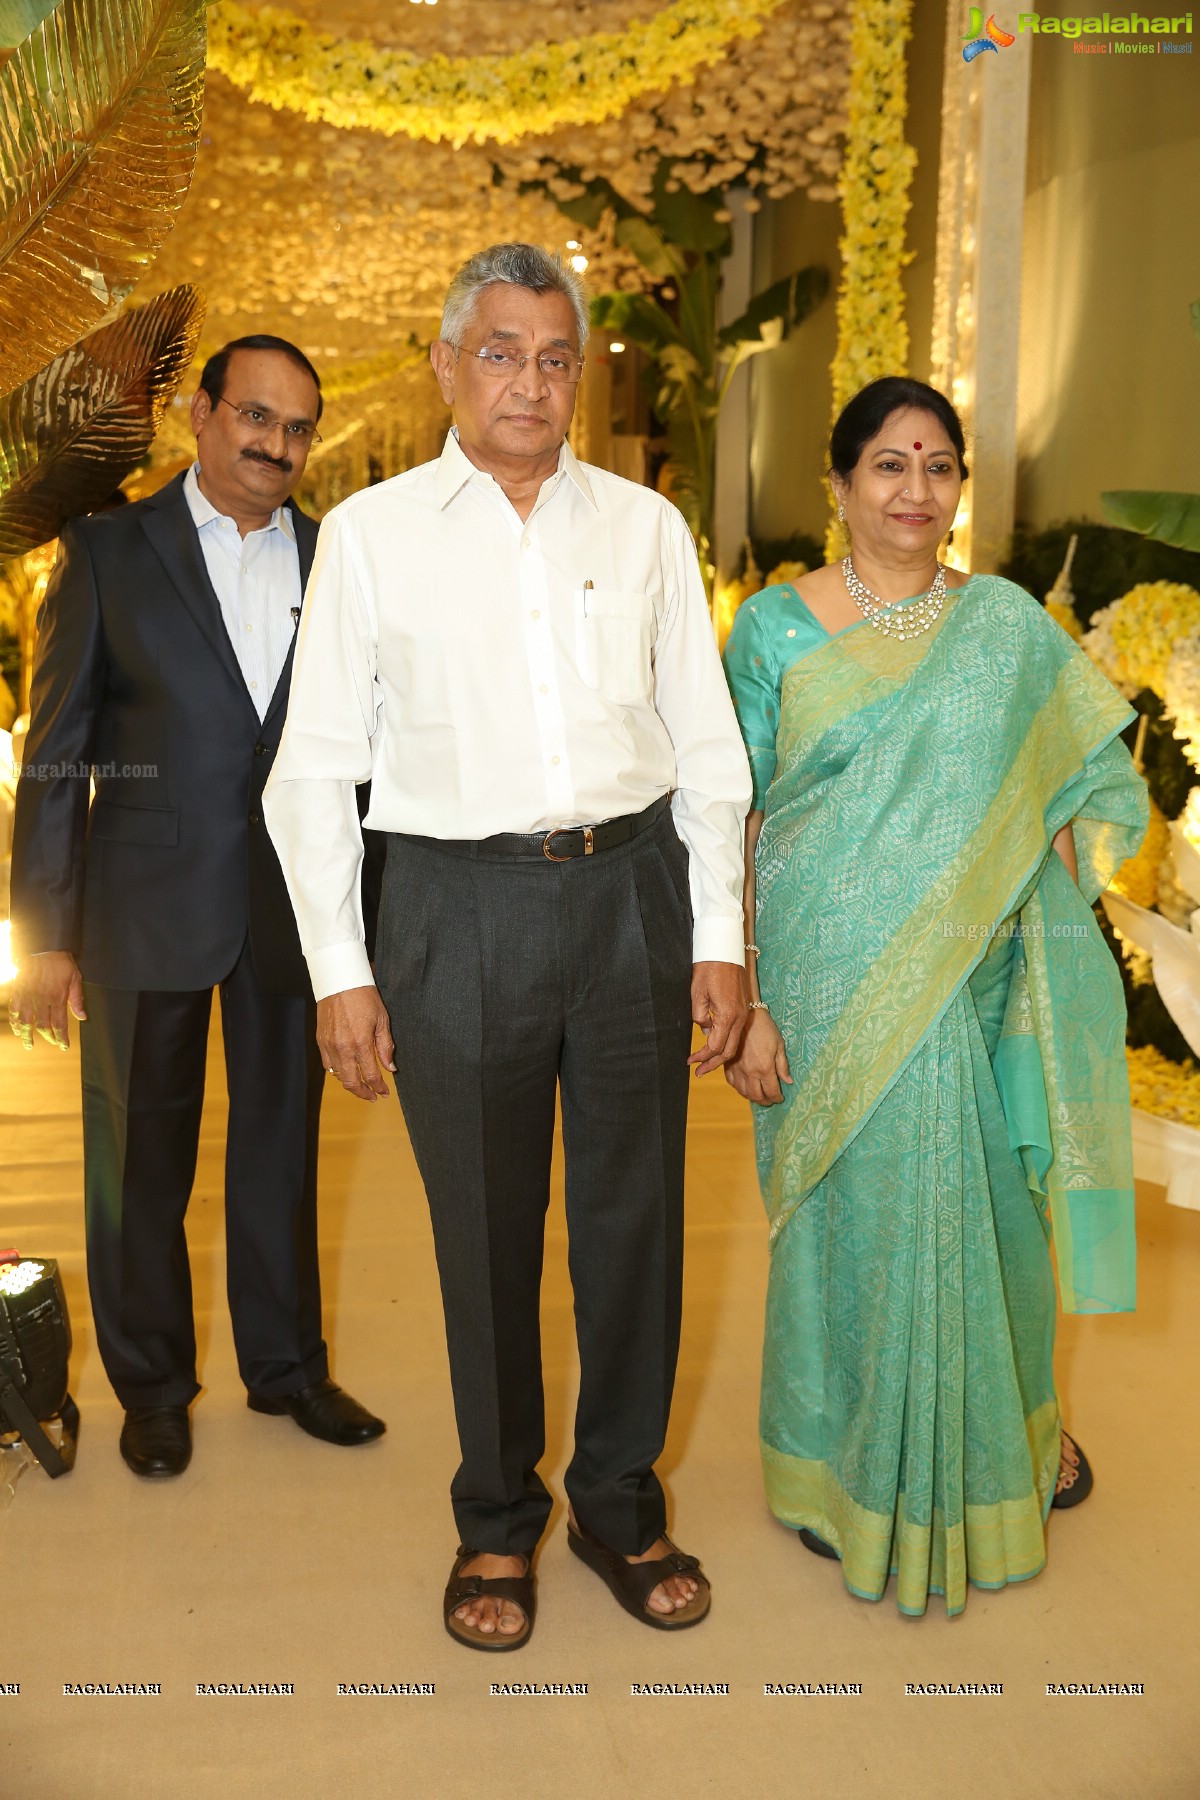 Pelli Koduku Ceremony of Anindith Reddy (Dr Prathap C. Reddy's Grandson) at JRC Conventions & Trade Fairs